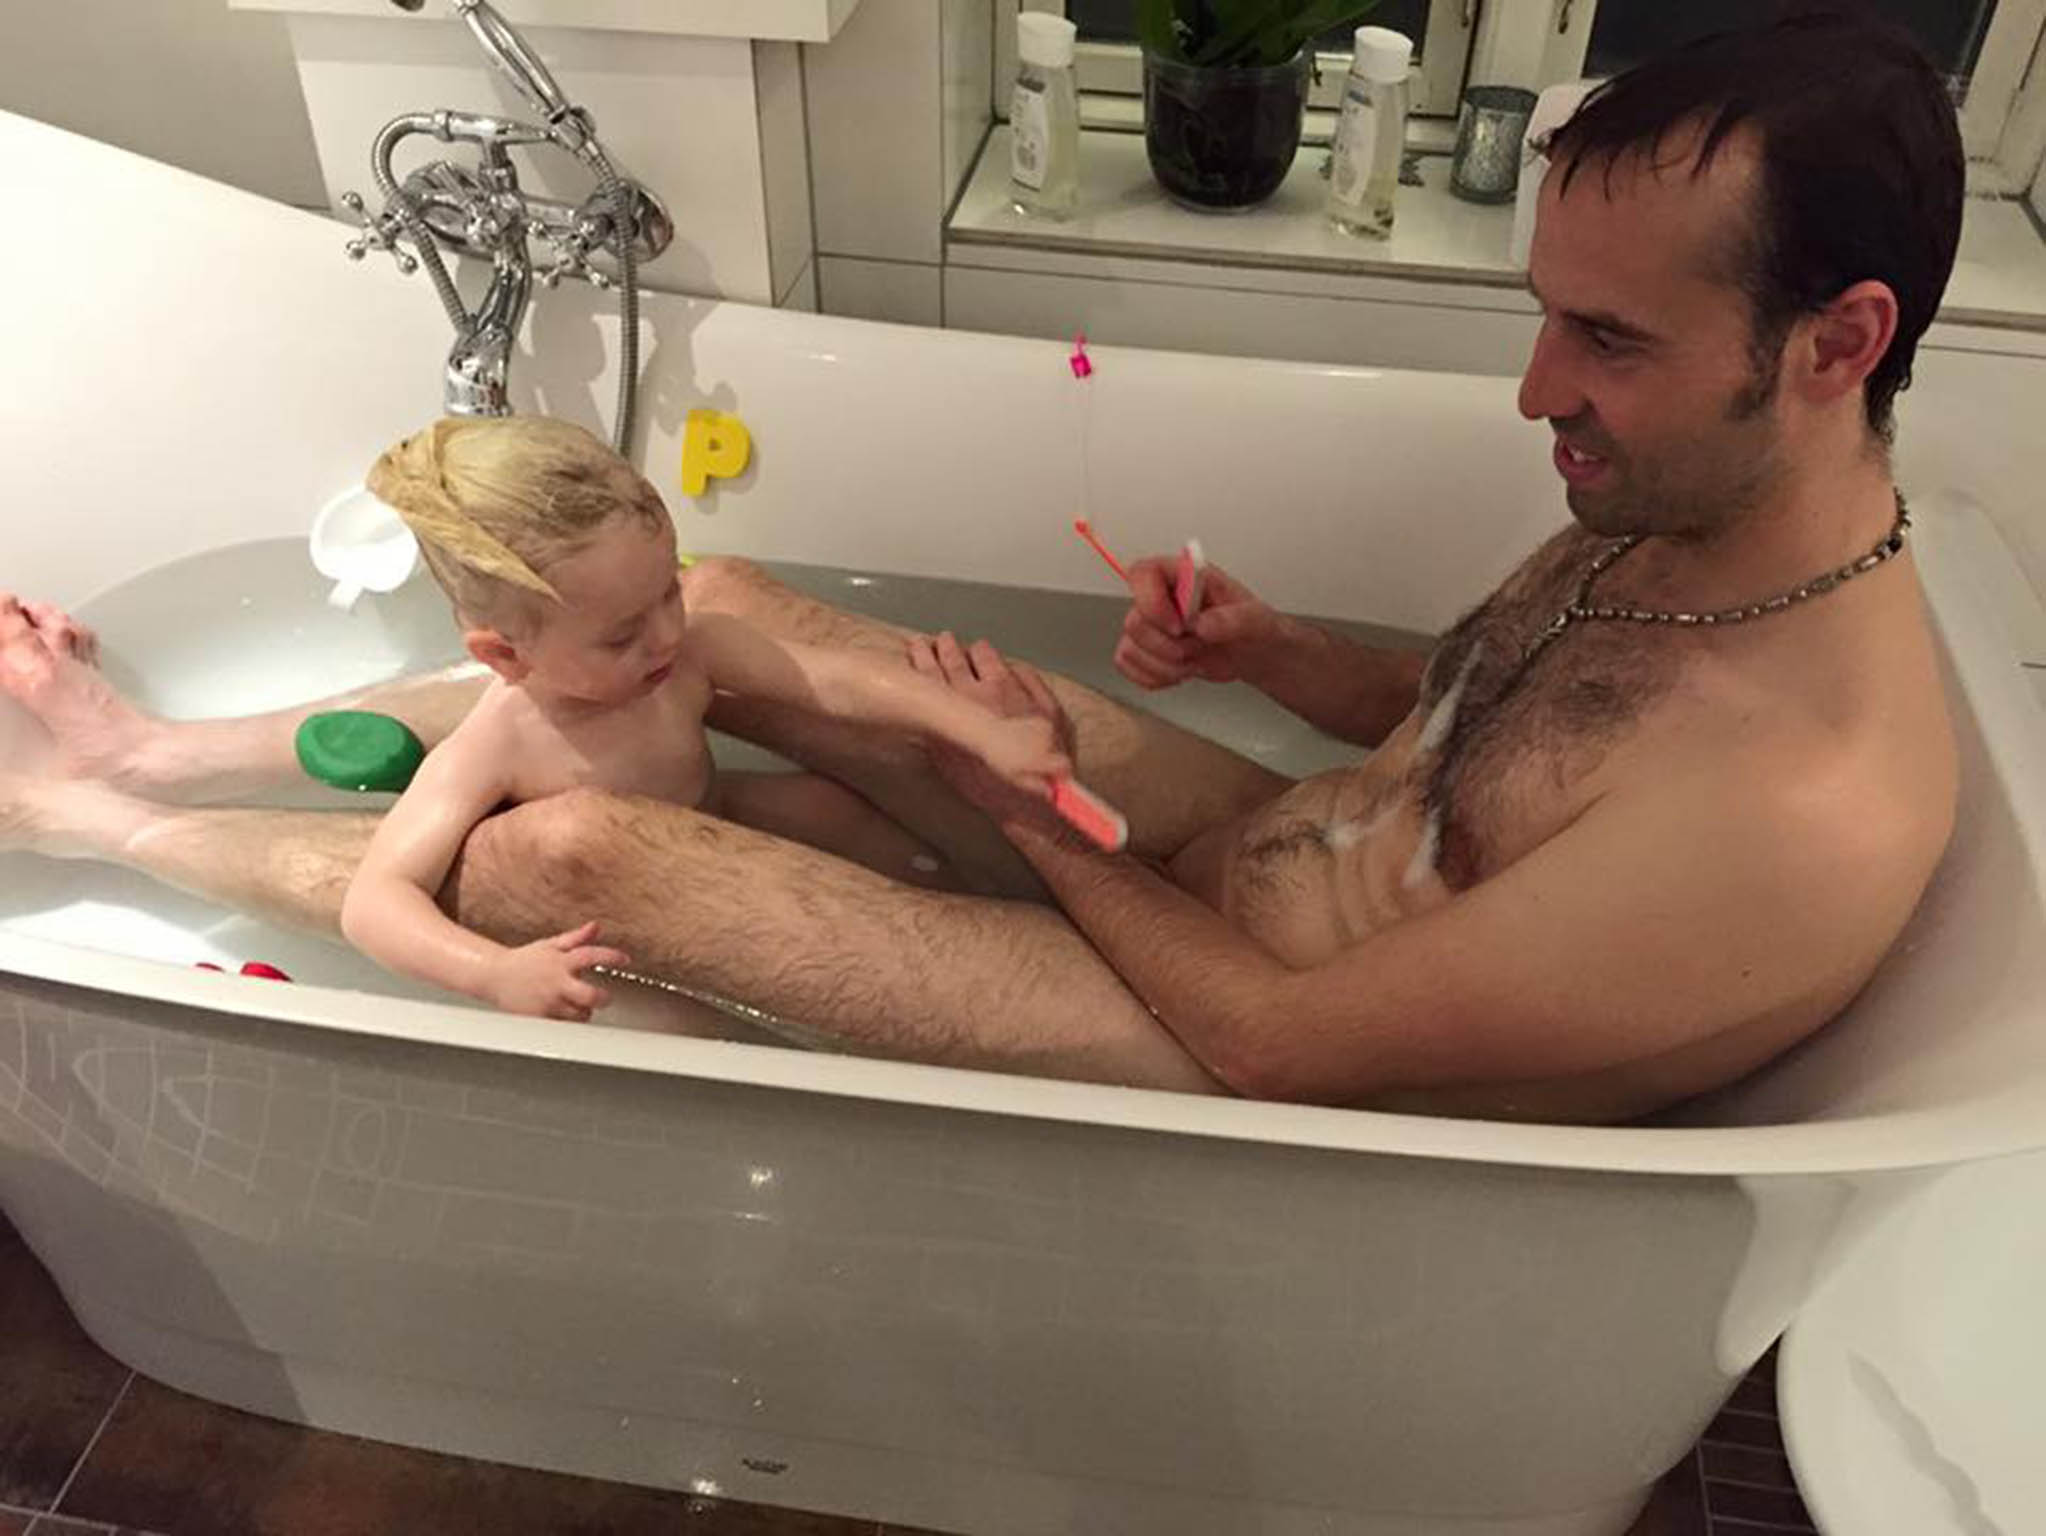 Torben Chris Danish comedian posts photo of himself taking a bath with his two-year-old daughter in face of paedophilia claims The Independent The Independent pic